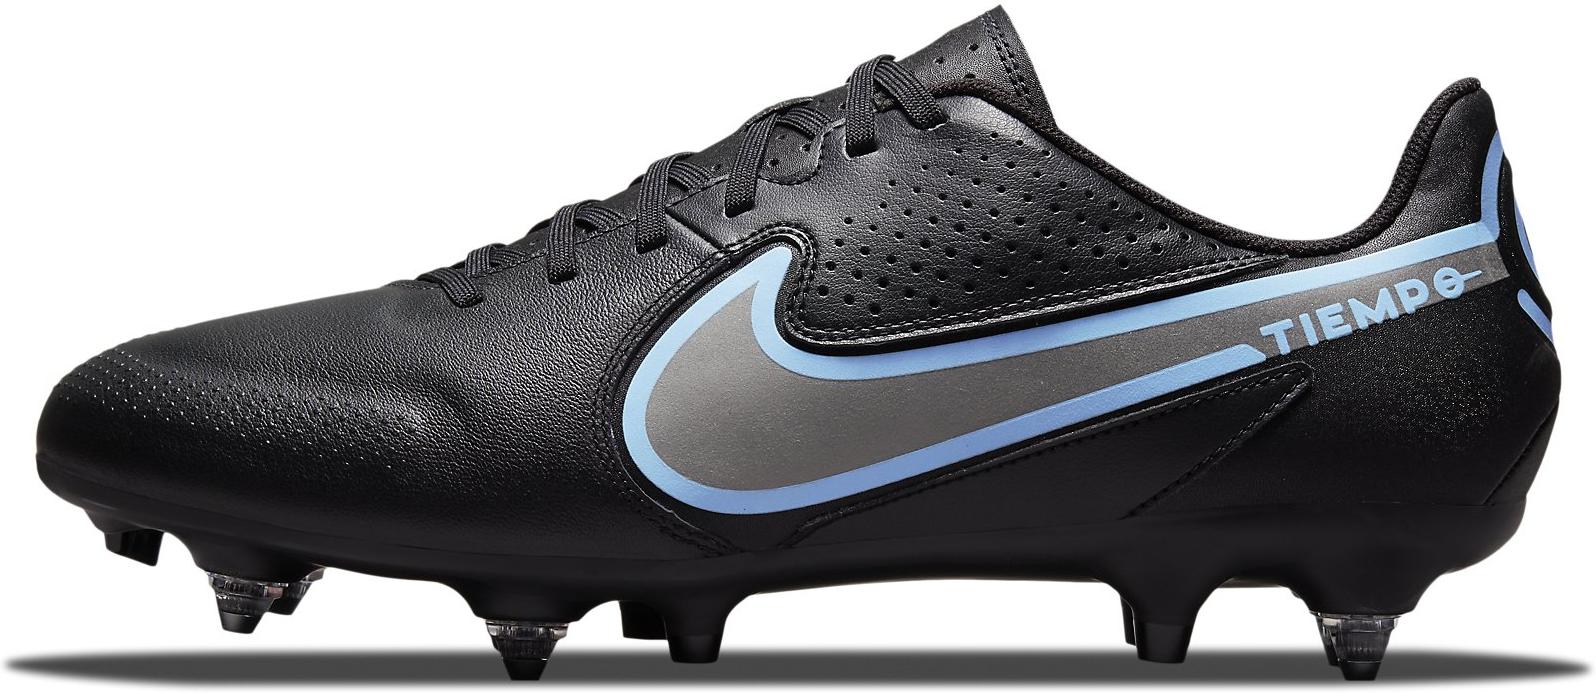 Football shoes Nike Tiempo Legend 9 Academy SG-Pro AC Soft-Ground Soccer Cleat